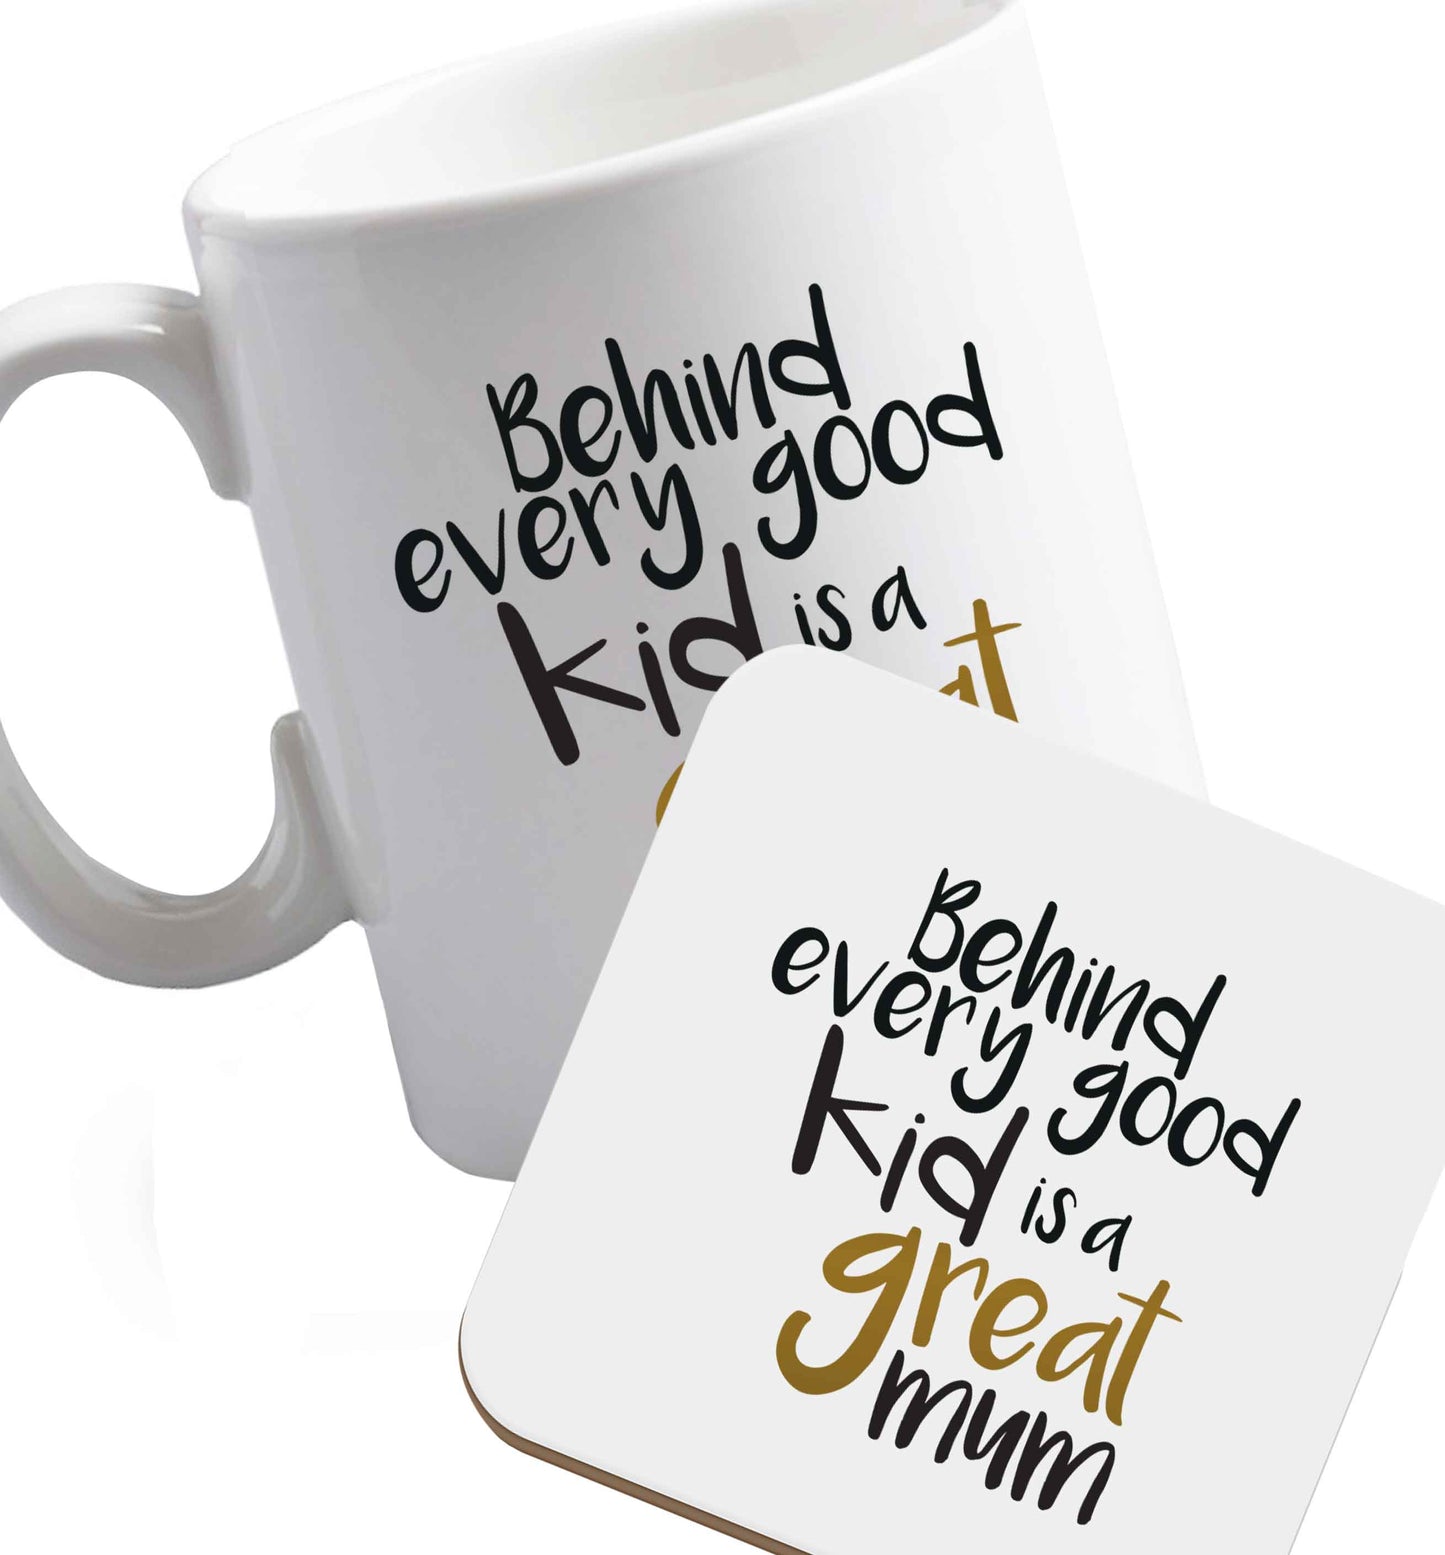 10 oz Behind every good kid is a great mum ceramic mug and coaster set right handed